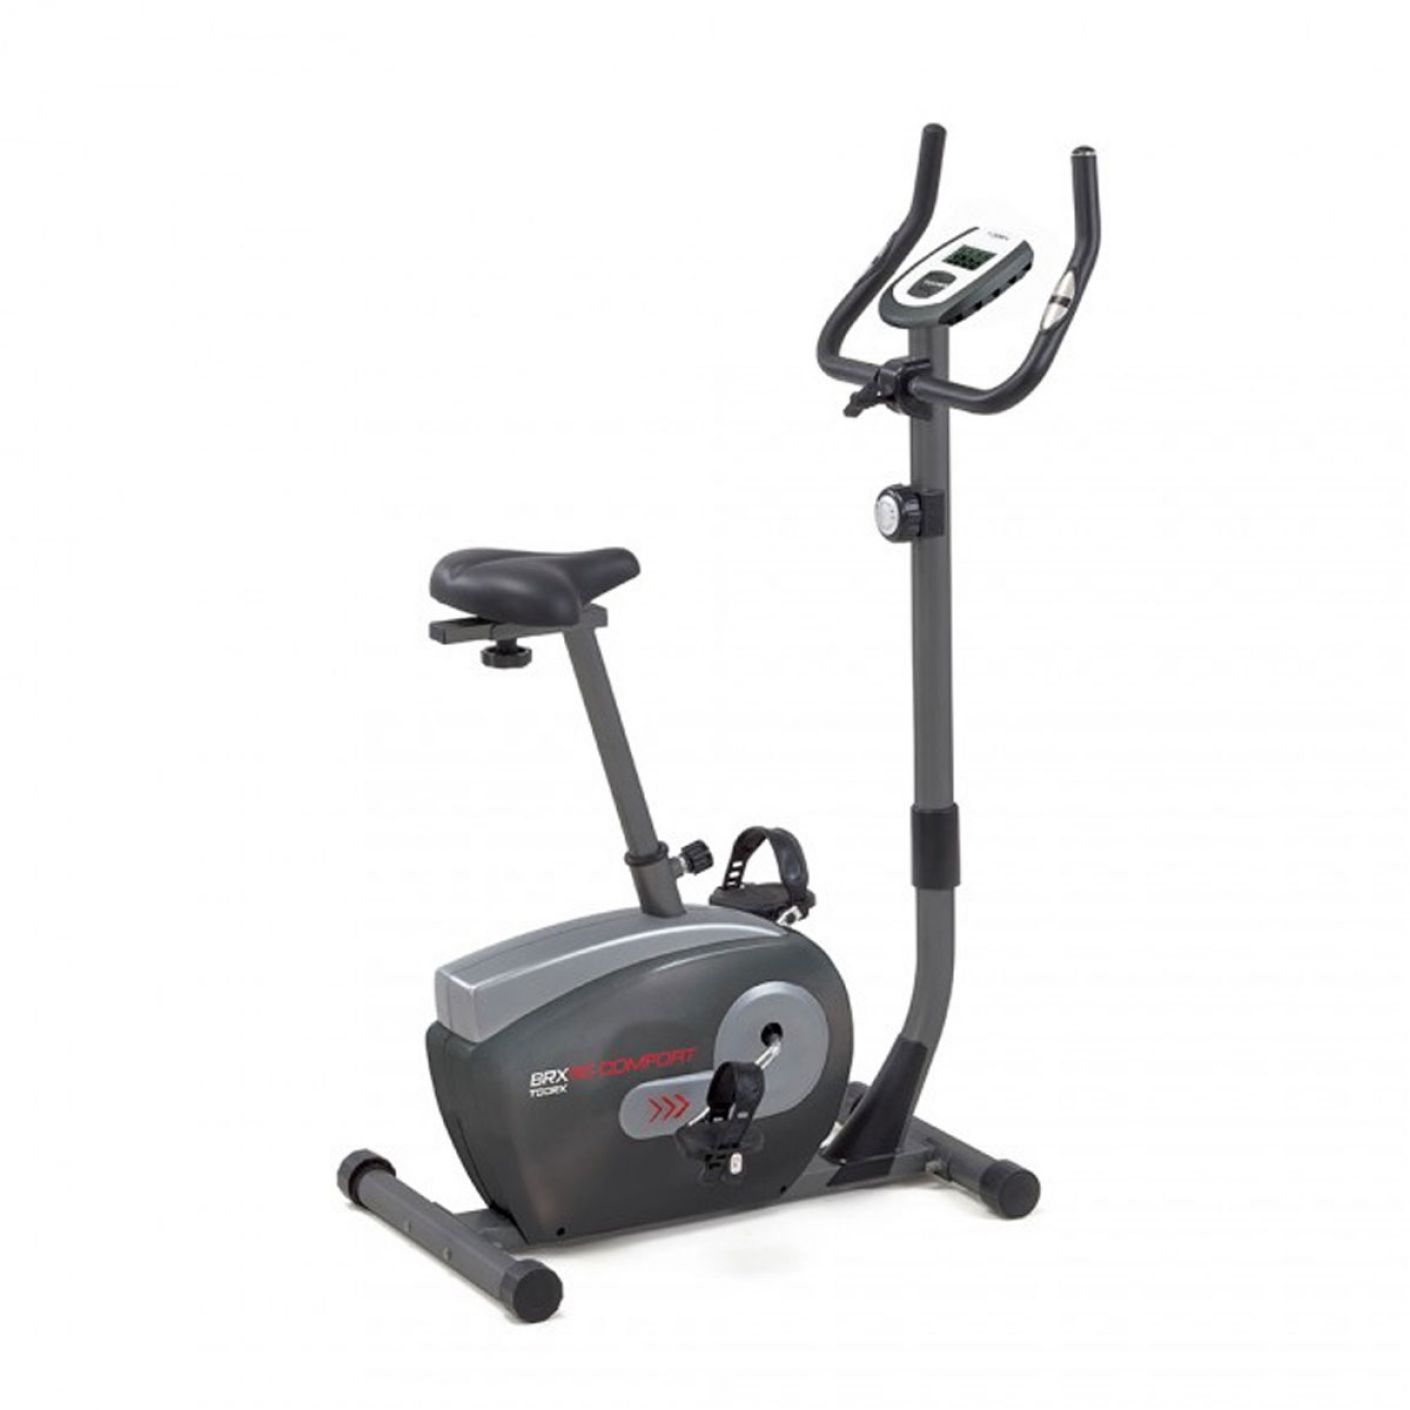 Toorx BRX-55 Easy access COMFORT exercise bike